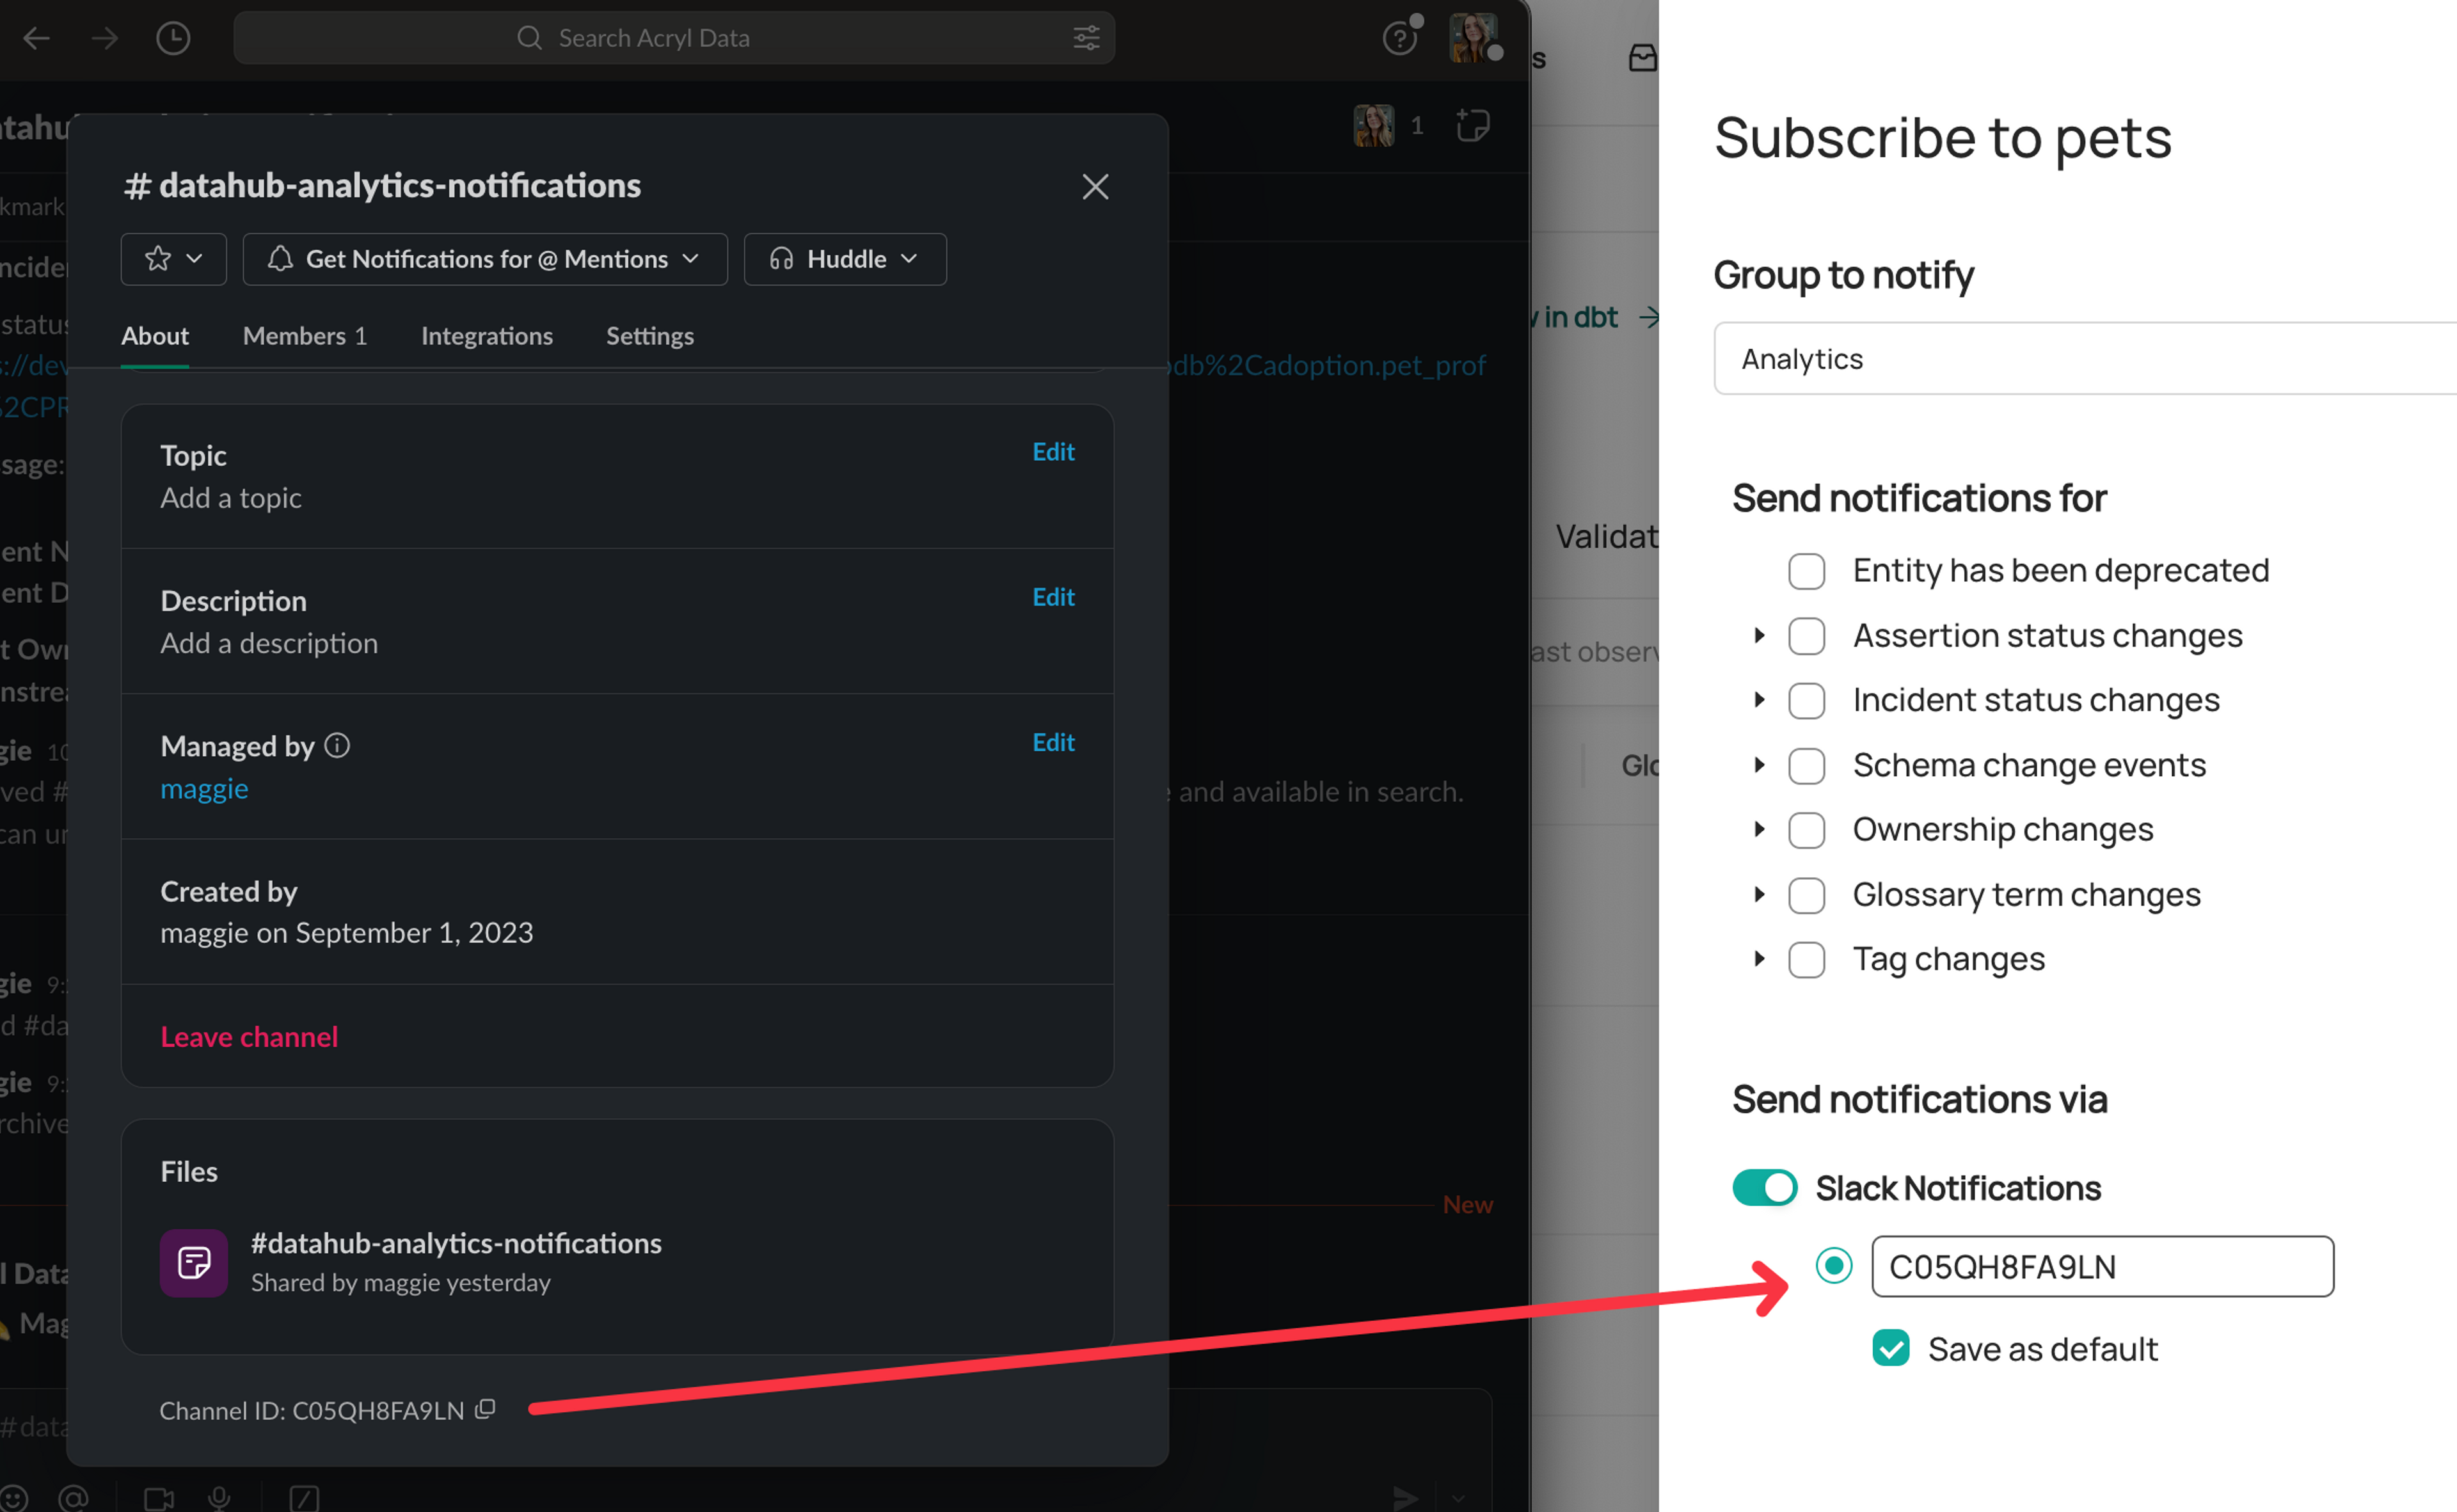 Subscription and Notifications - Group set channel ID